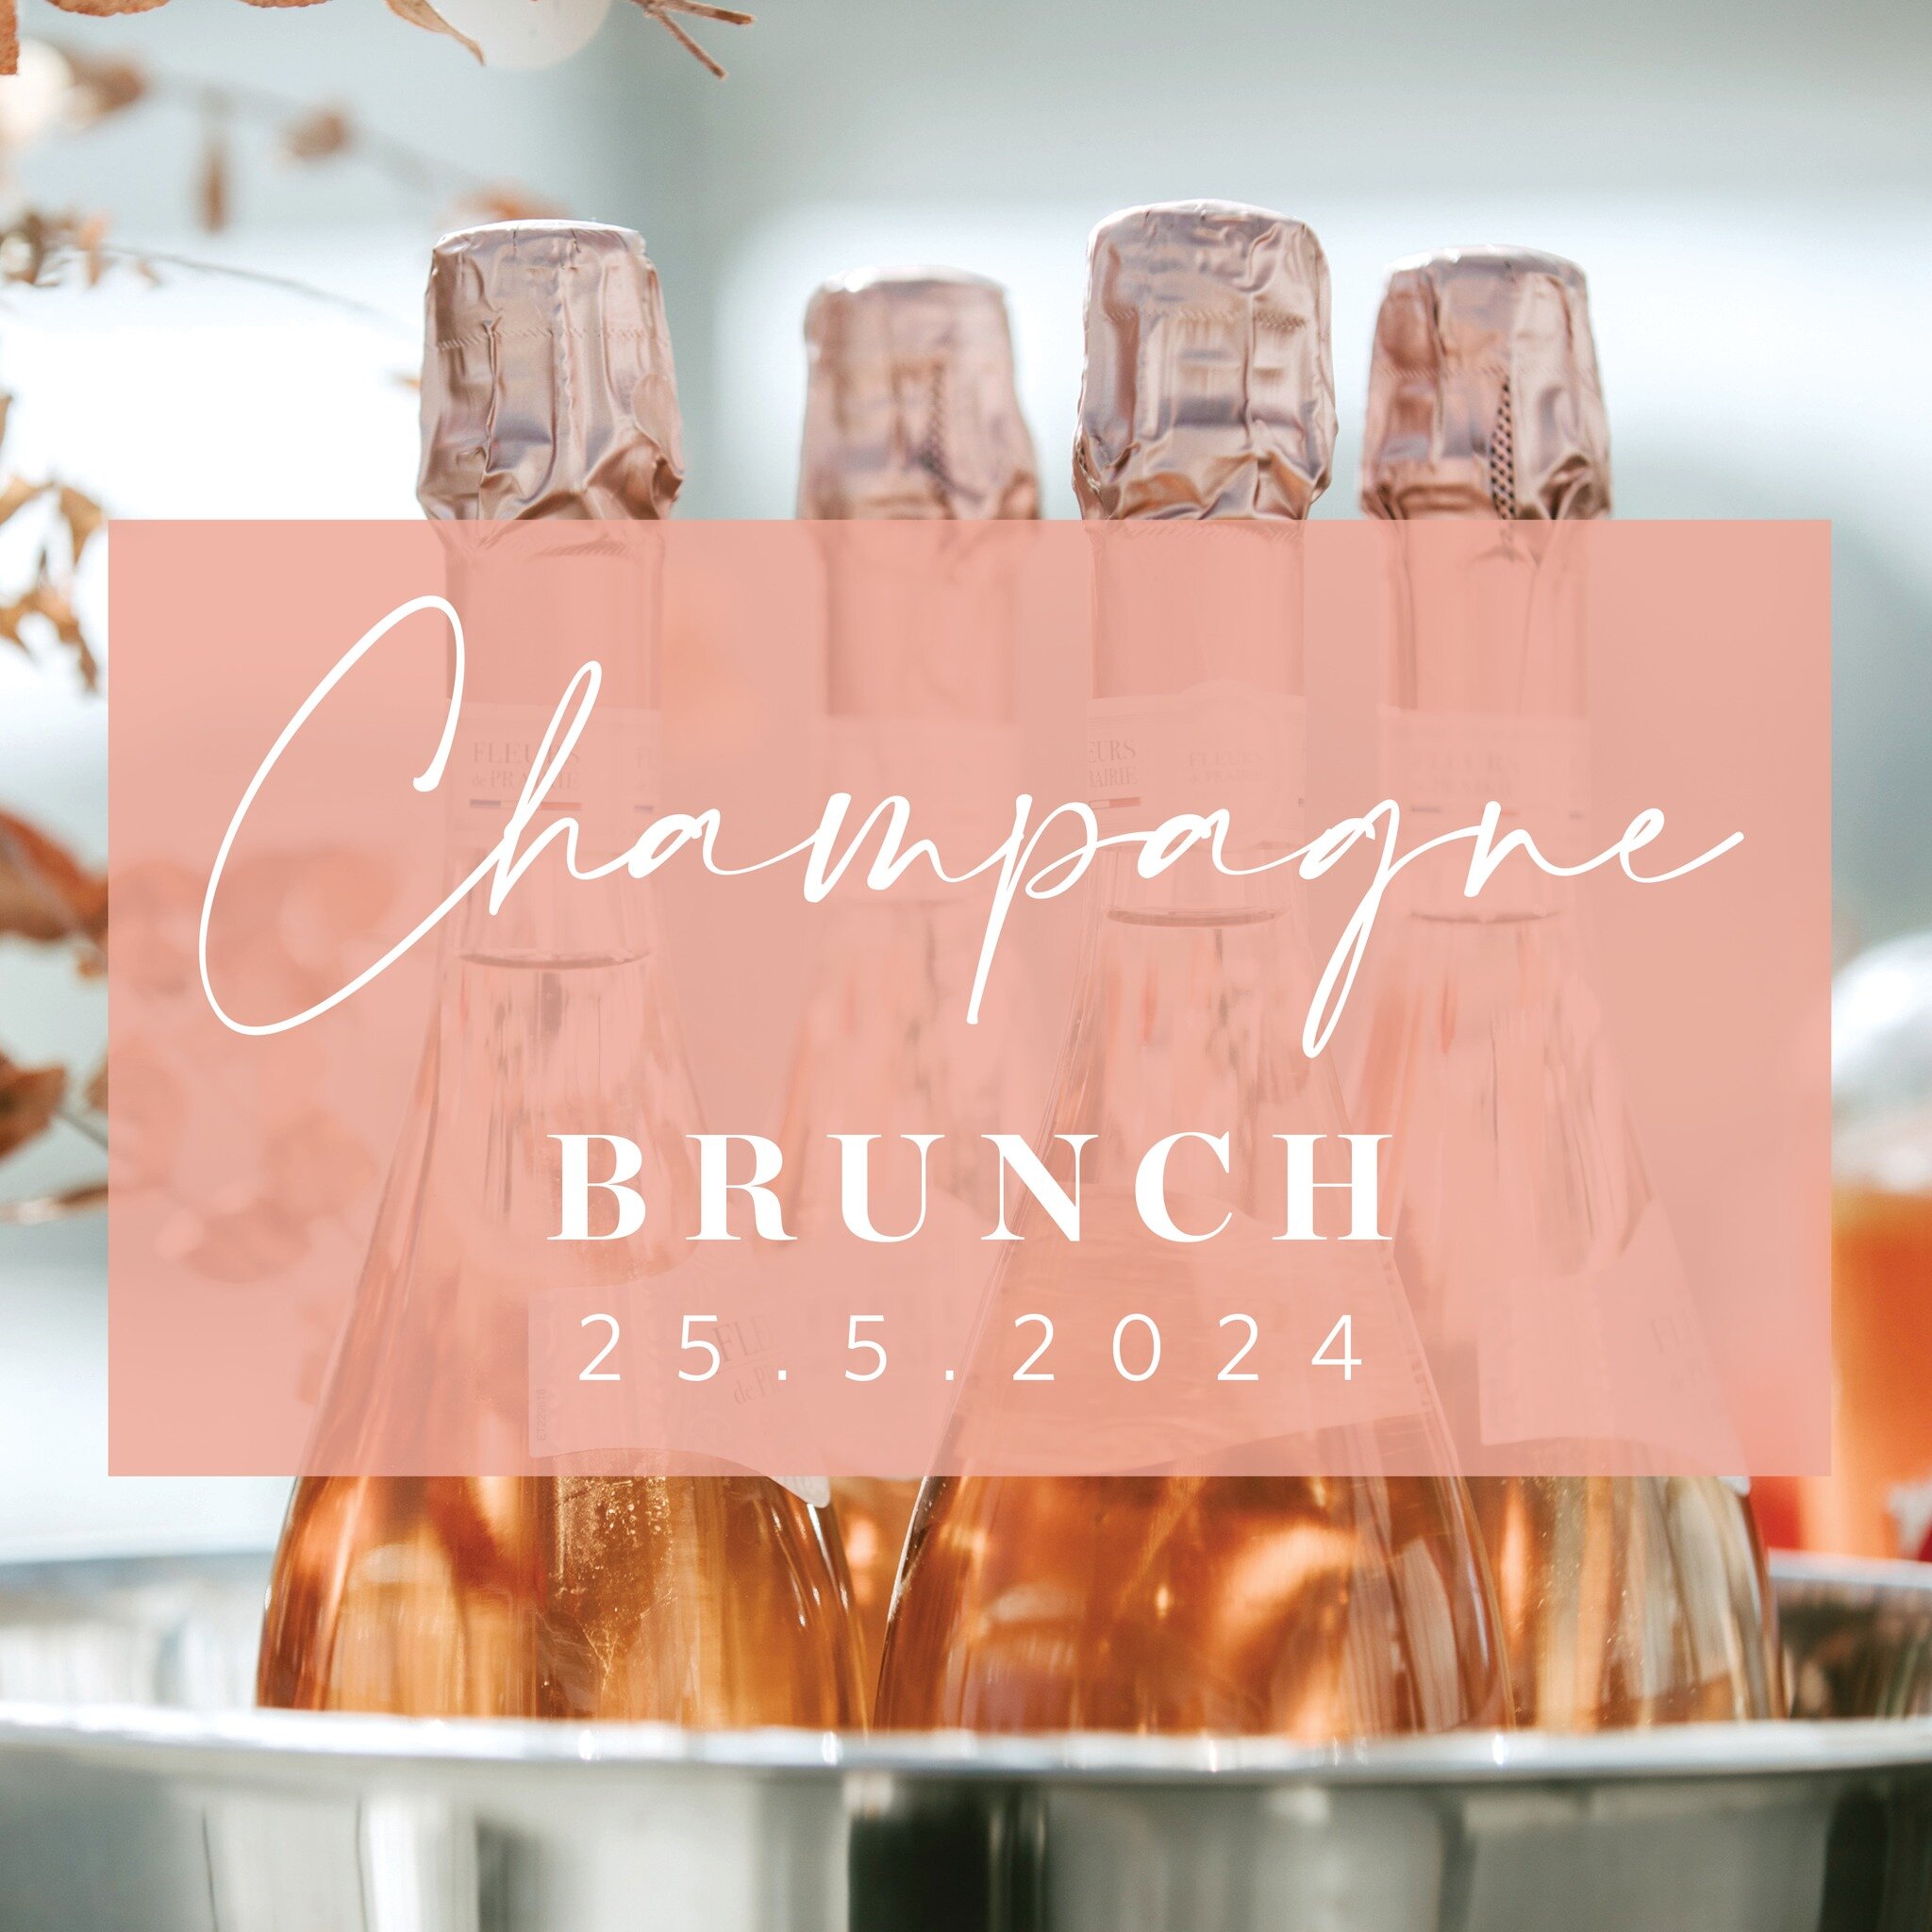 🥂✨ . CHAMPAGNE BRUNCH 2024. ✨🥂

Get your family or friends together for a relaxed Saturday session in the marquee, with all kinds of bubbles and a 'tapas inspired' brunch, the food keeps on rolling out in front of you to then finish off with yummy 